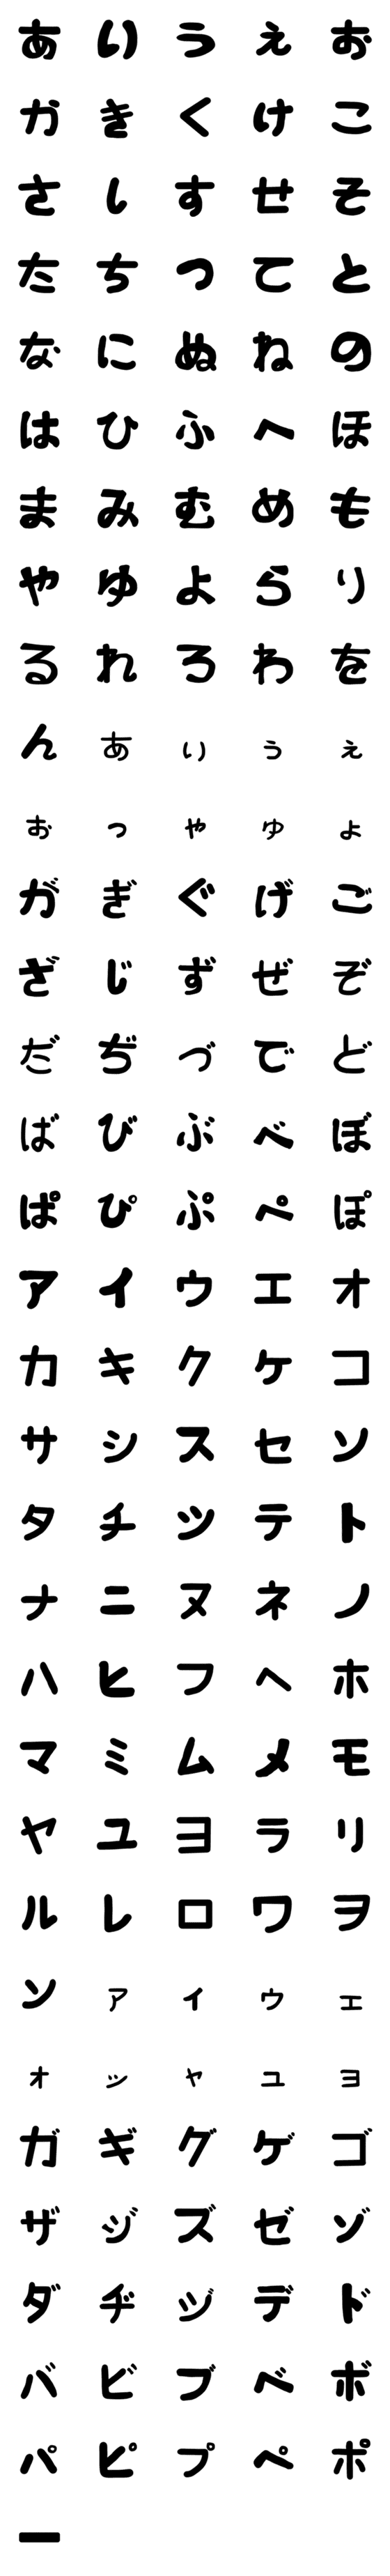 [LINE絵文字]簡単文字＿黑いデコ文字(かなカナ)の画像一覧